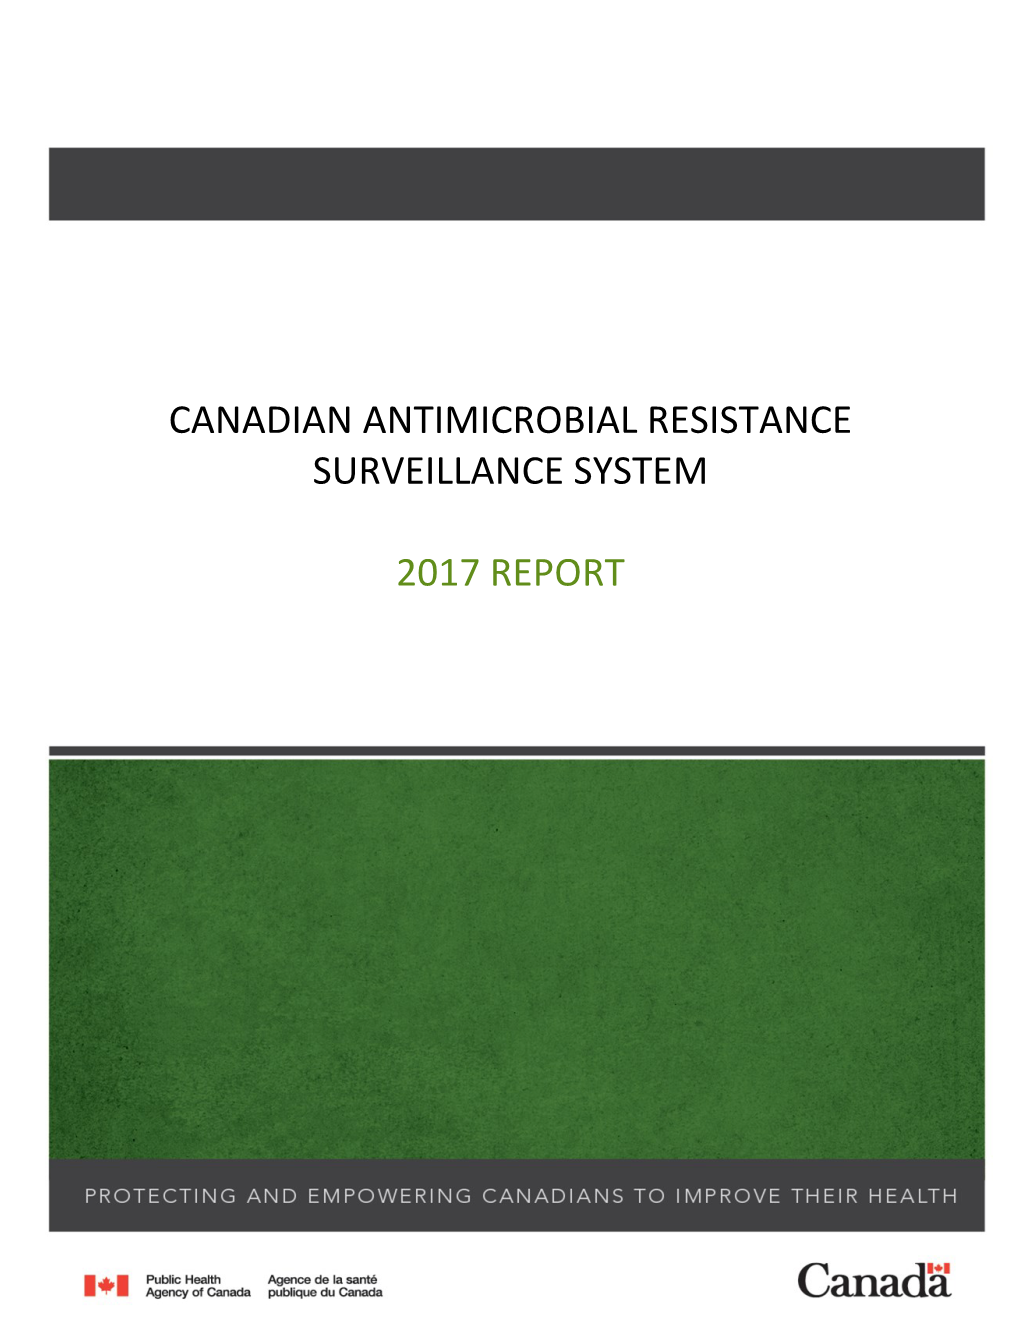 Canadian Antimicrobial Resistance Surveillance System Report